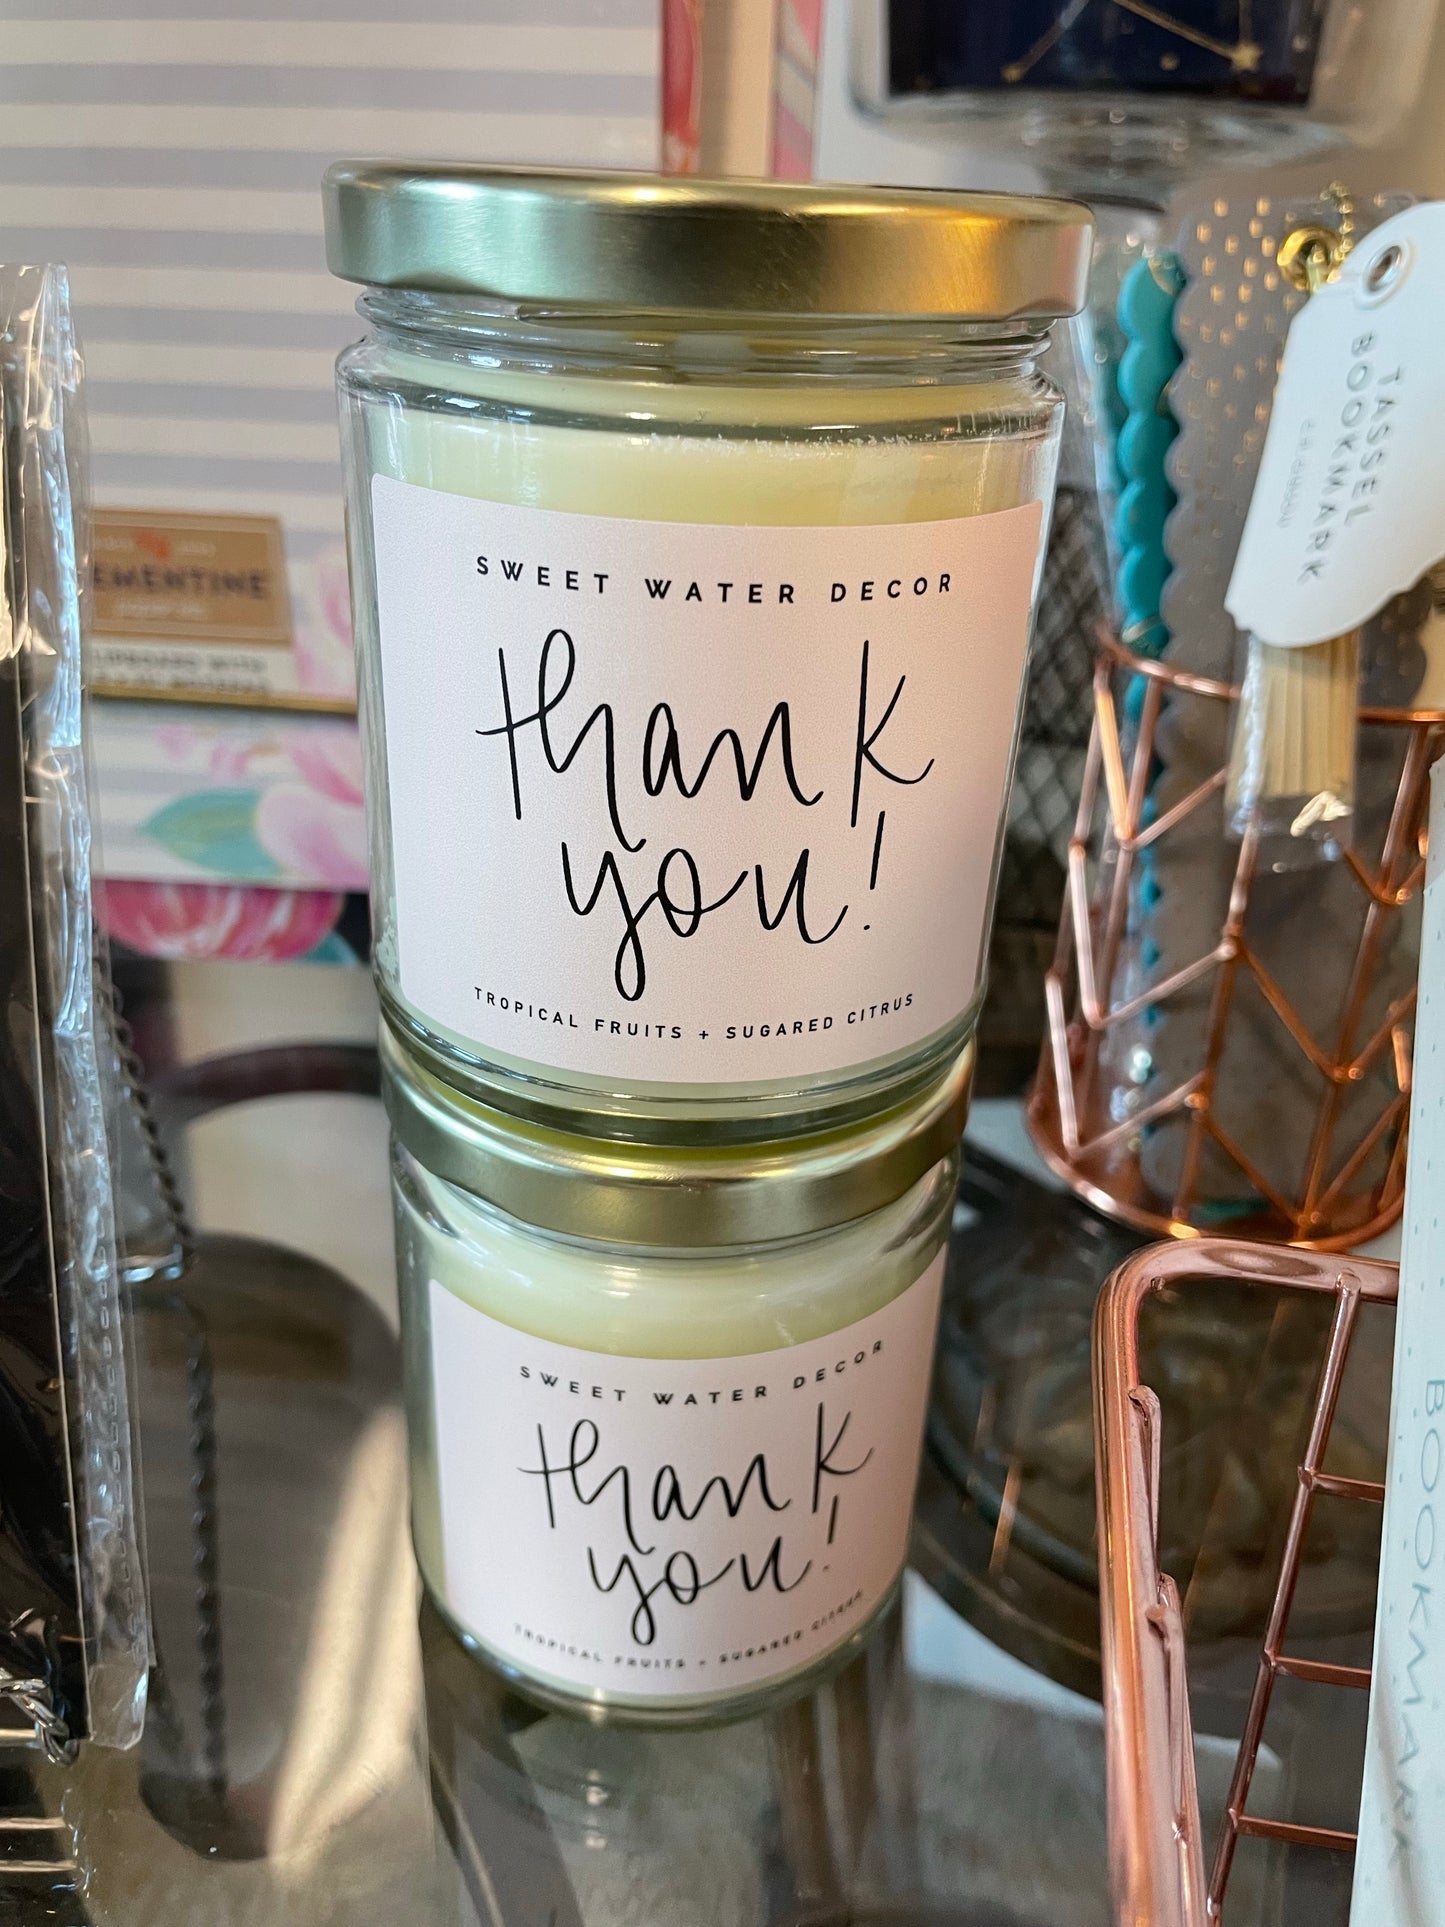 Thank You Candle